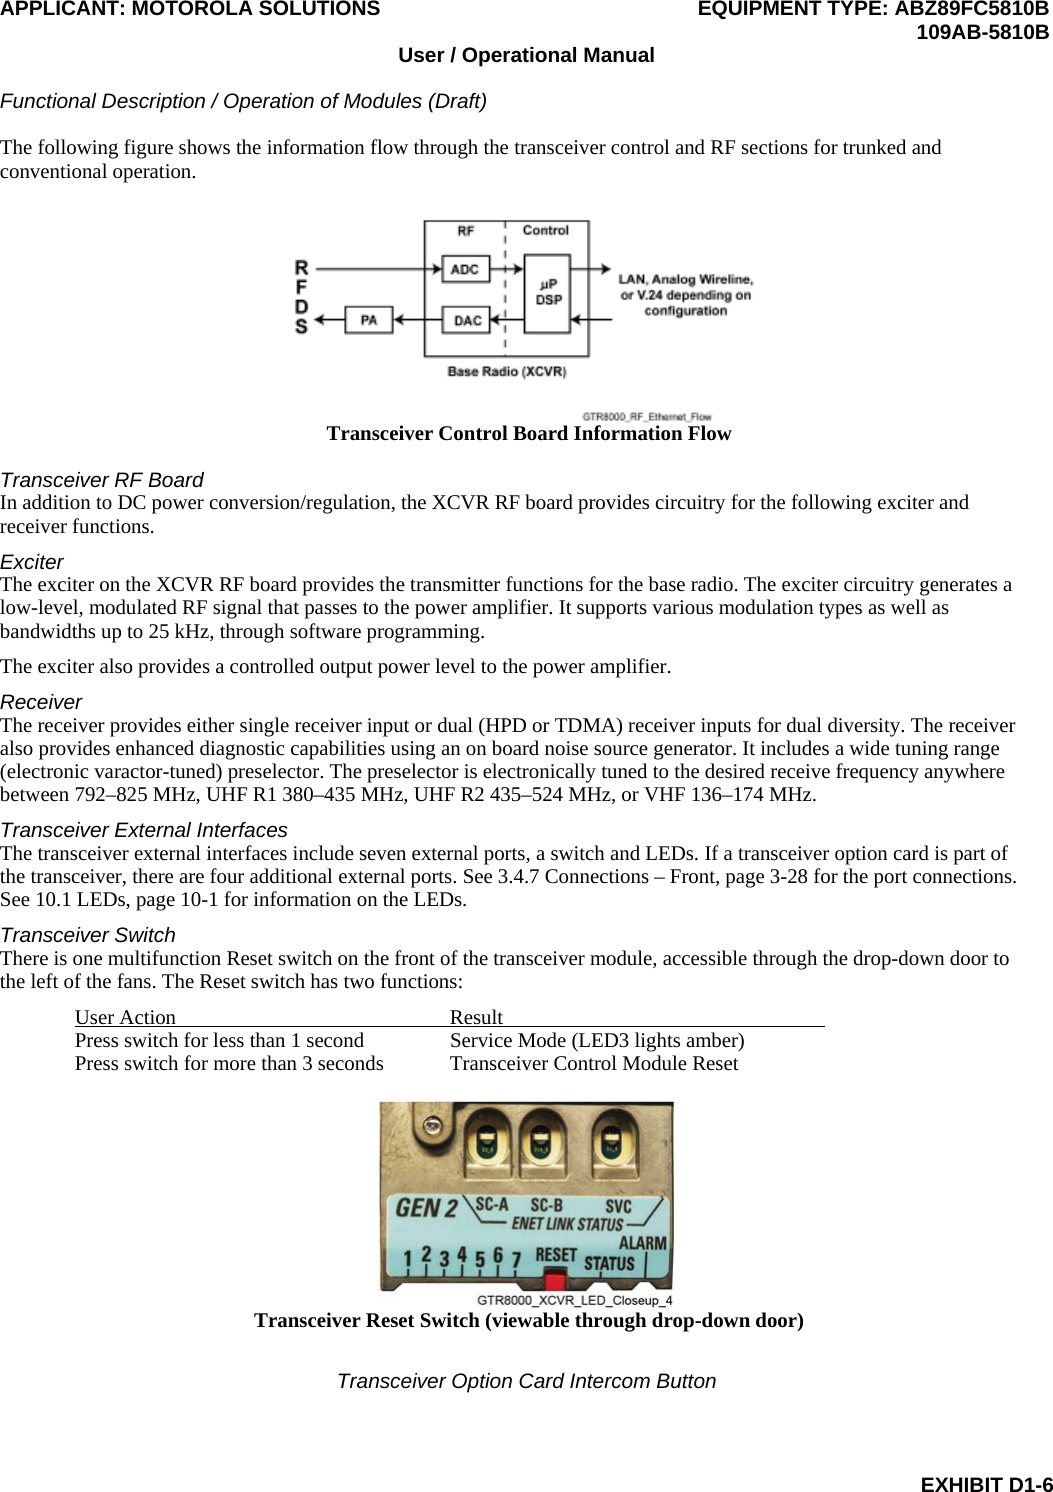 APPLICANT: MOTOROLA SOLUTIONS EQUIPMENT TYPE: ABZ89FC5810B  109AB-5810B User / Operational Manual  Functional Description / Operation of Modules (Draft)  EXHIBIT D1-6 The following figure shows the information flow through the transceiver control and RF sections for trunked and conventional operation.  Transceiver Control Board Information Flow  Transceiver RF Board In addition to DC power conversion/regulation, the XCVR RF board provides circuitry for the following exciter and receiver functions. Exciter The exciter on the XCVR RF board provides the transmitter functions for the base radio. The exciter circuitry generates a low-level, modulated RF signal that passes to the power amplifier. It supports various modulation types as well as bandwidths up to 25 kHz, through software programming. The exciter also provides a controlled output power level to the power amplifier. Receiver The receiver provides either single receiver input or dual (HPD or TDMA) receiver inputs for dual diversity. The receiver also provides enhanced diagnostic capabilities using an on board noise source generator. It includes a wide tuning range (electronic varactor-tuned) preselector. The preselector is electronically tuned to the desired receive frequency anywhere between 792–825 MHz, UHF R1 380–435 MHz, UHF R2 435–524 MHz, or VHF 136–174 MHz. Transceiver External Interfaces The transceiver external interfaces include seven external ports, a switch and LEDs. If a transceiver option card is part of the transceiver, there are four additional external ports. See 3.4.7 Connections – Front, page 3-28 for the port connections. See 10.1 LEDs, page 10-1 for information on the LEDs. Transceiver Switch There is one multifunction Reset switch on the front of the transceiver module, accessible through the drop-down door to the left of the fans. The Reset switch has two functions: User Action  Result   Press switch for less than 1 second  Service Mode (LED3 lights amber) Press switch for more than 3 seconds  Transceiver Control Module Reset   Transceiver Reset Switch (viewable through drop-down door)  Transceiver Option Card Intercom Button 